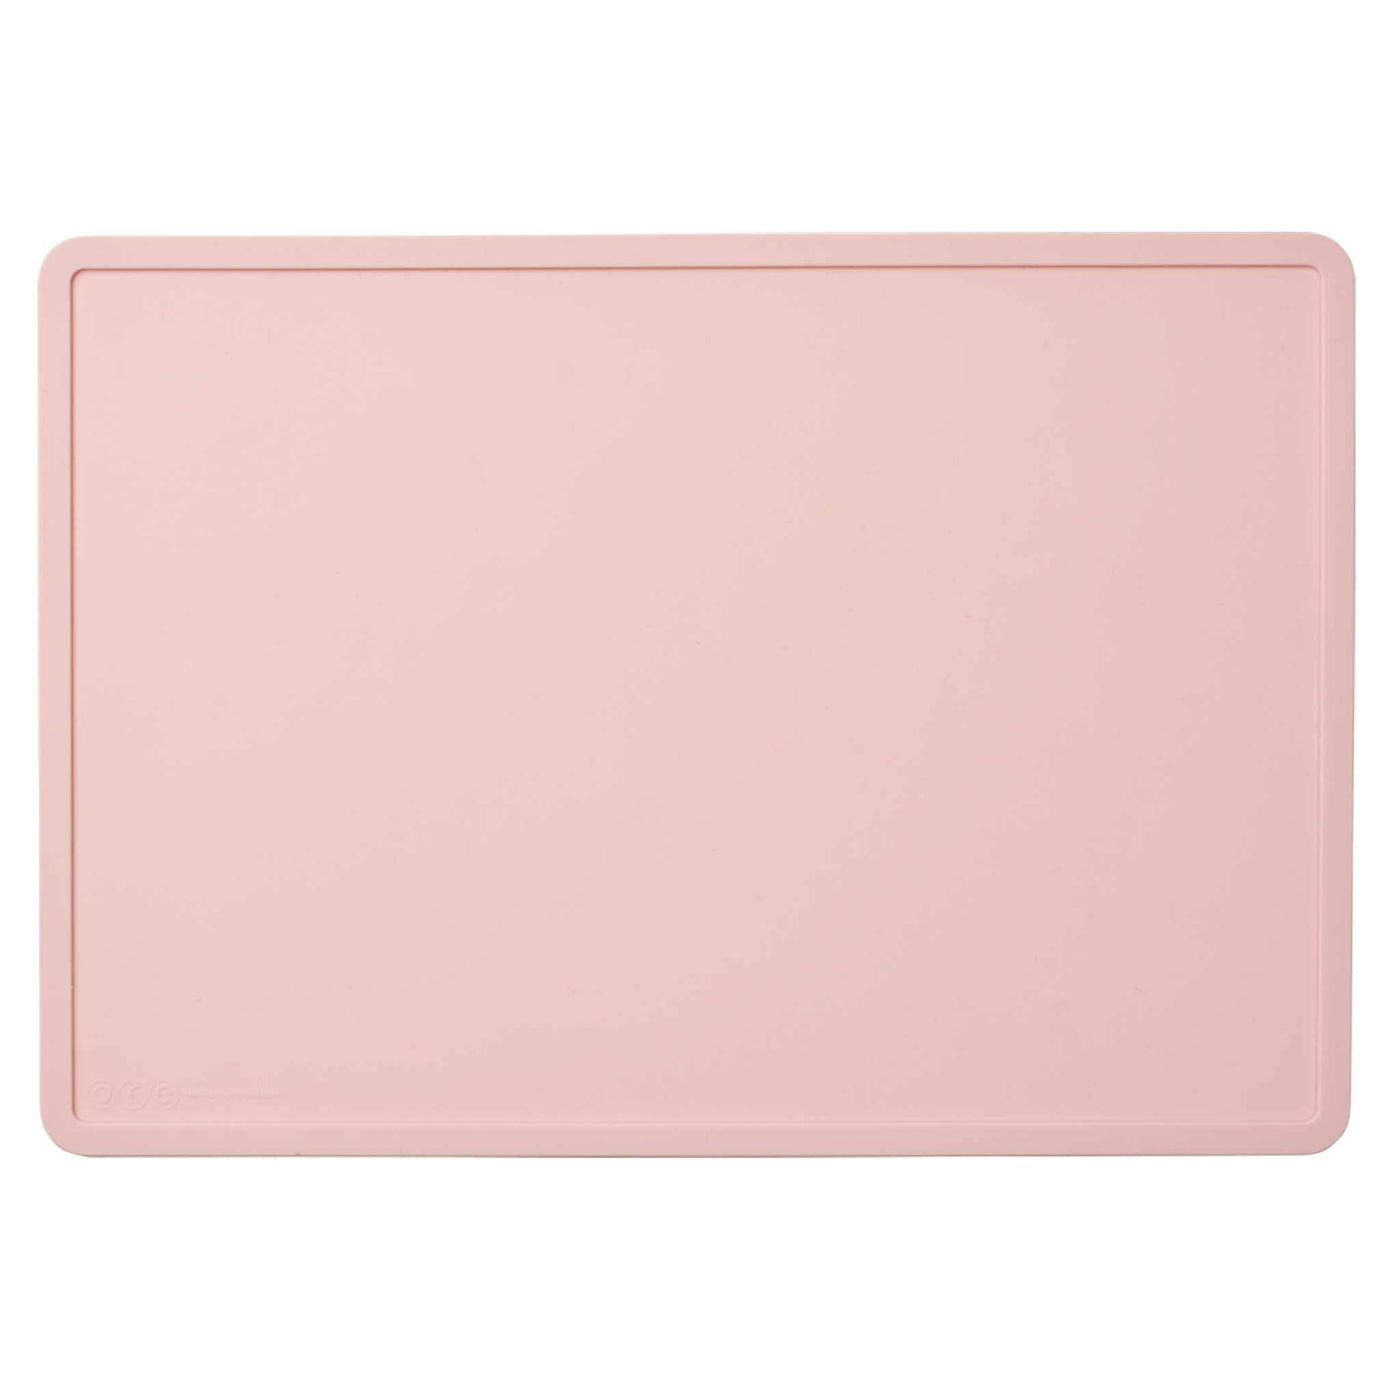 Silicone Placemat | Pink - Brazen Ranch